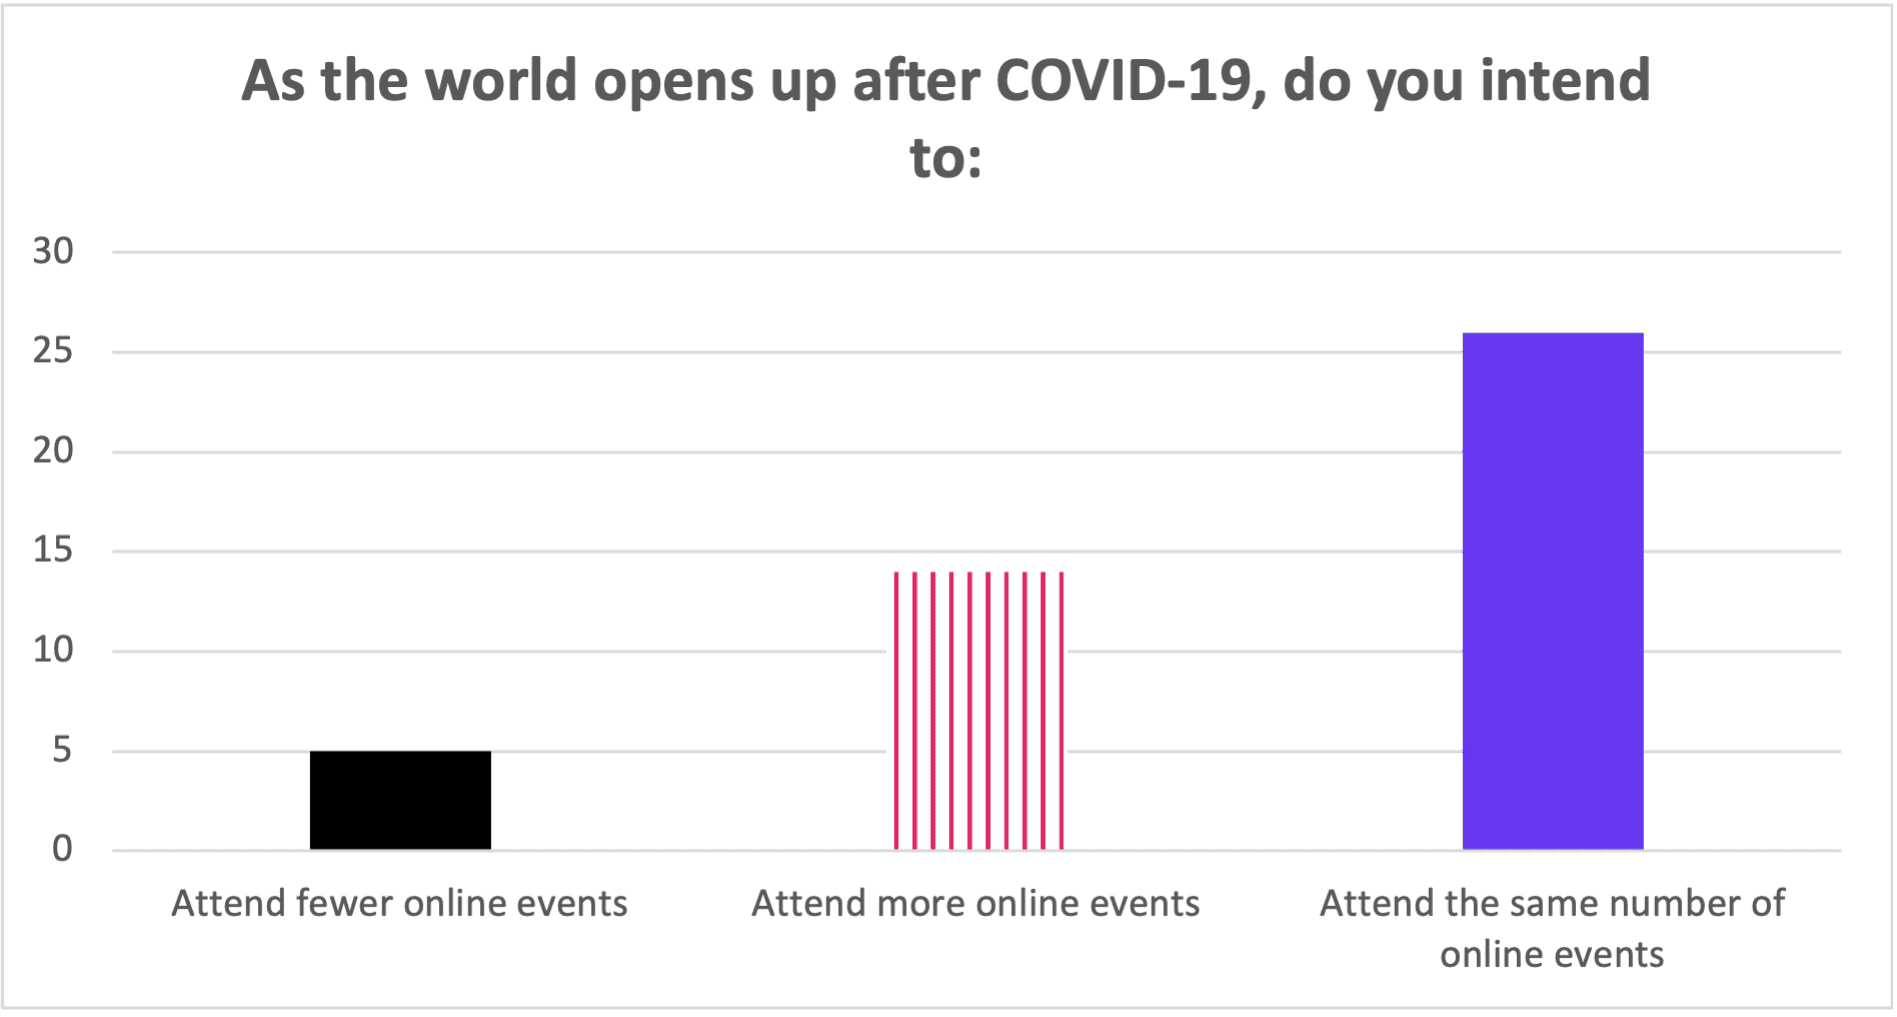 A chart showing that after COVID most participants intend to keep attending the same amount of online events with about a quarter saying they'll attend more